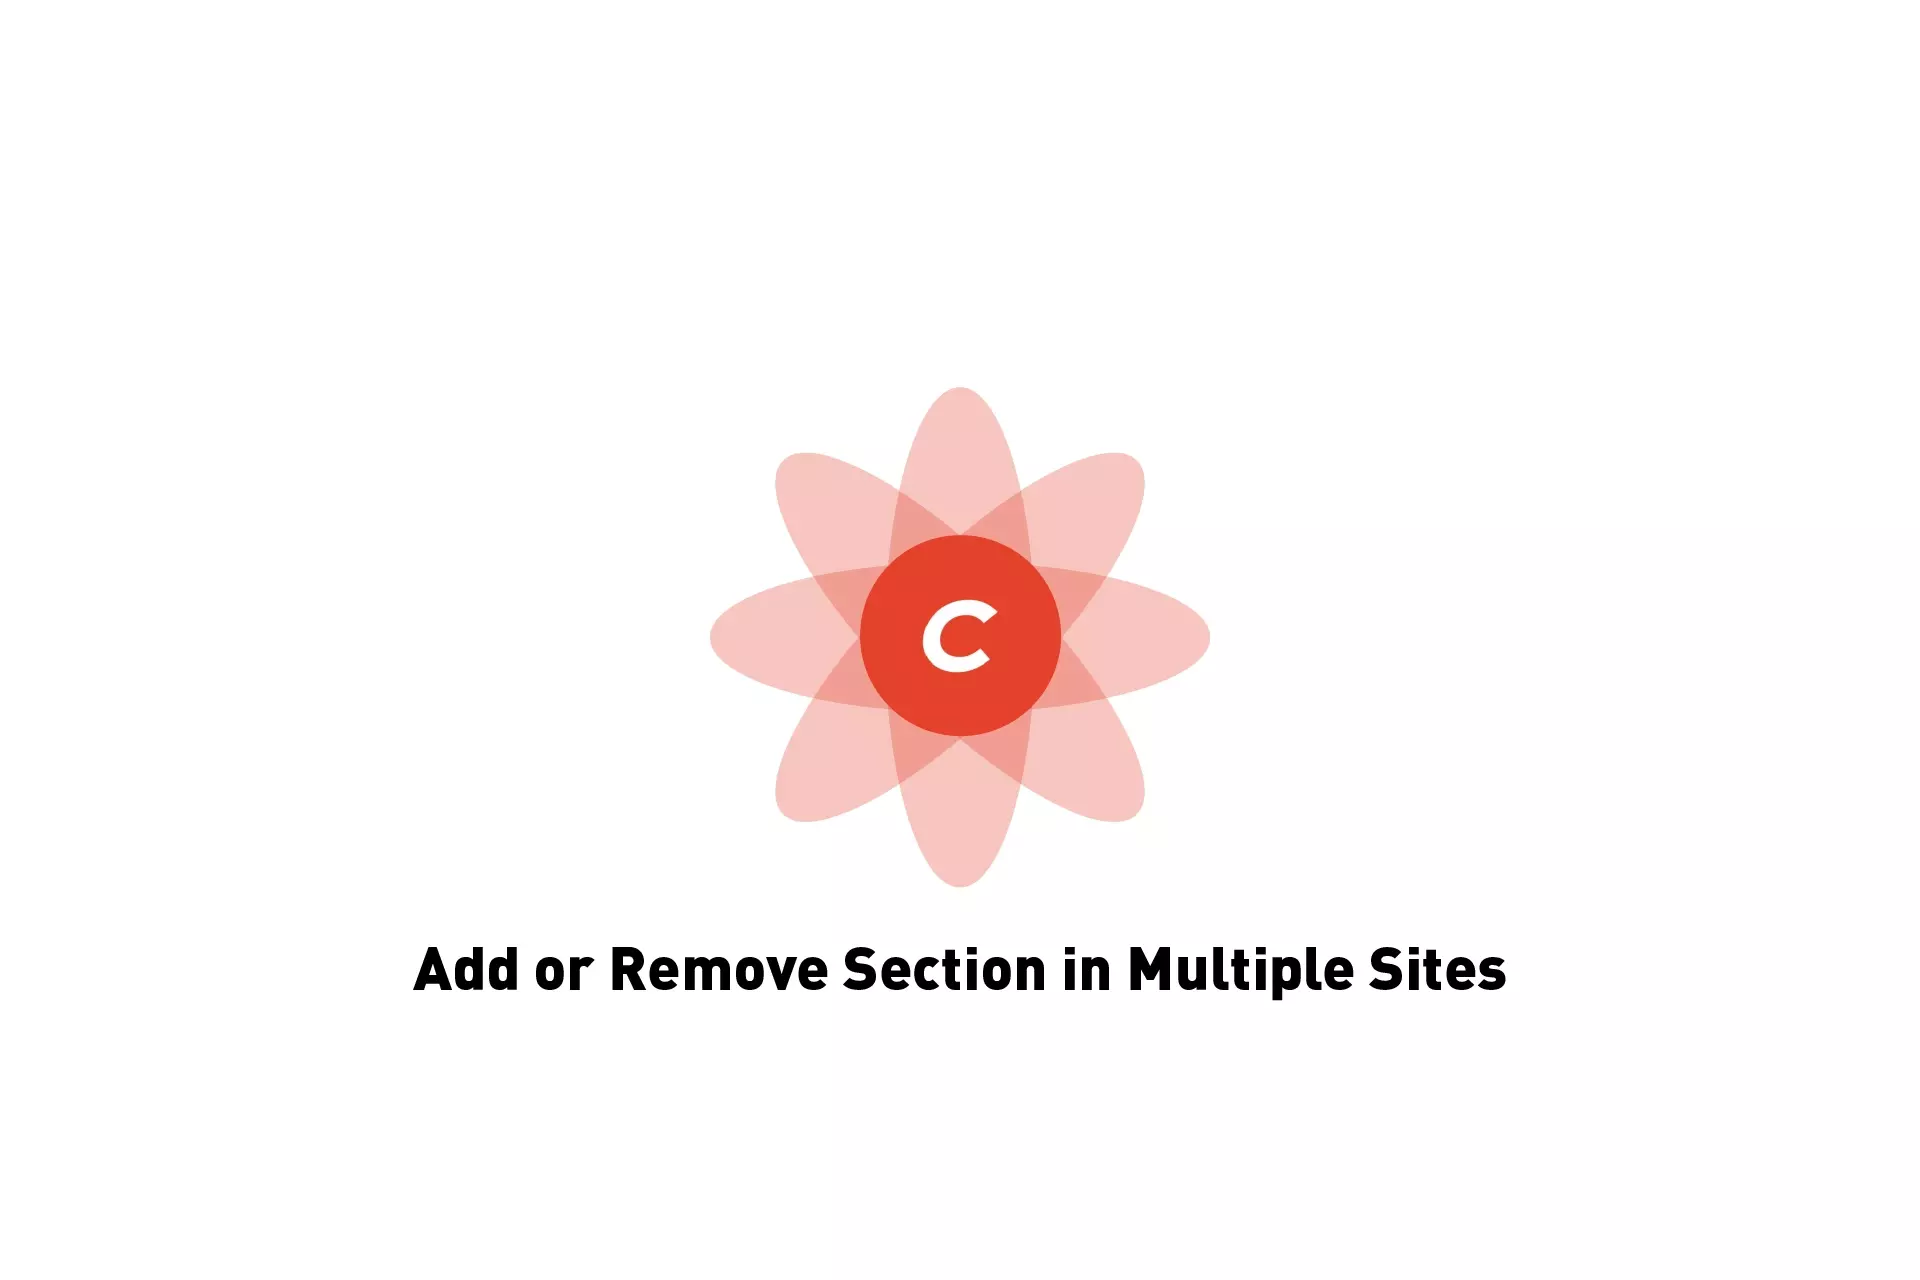 A flower that represents Craft CMS with the text "Add or Remove Section in Multiple Sites."